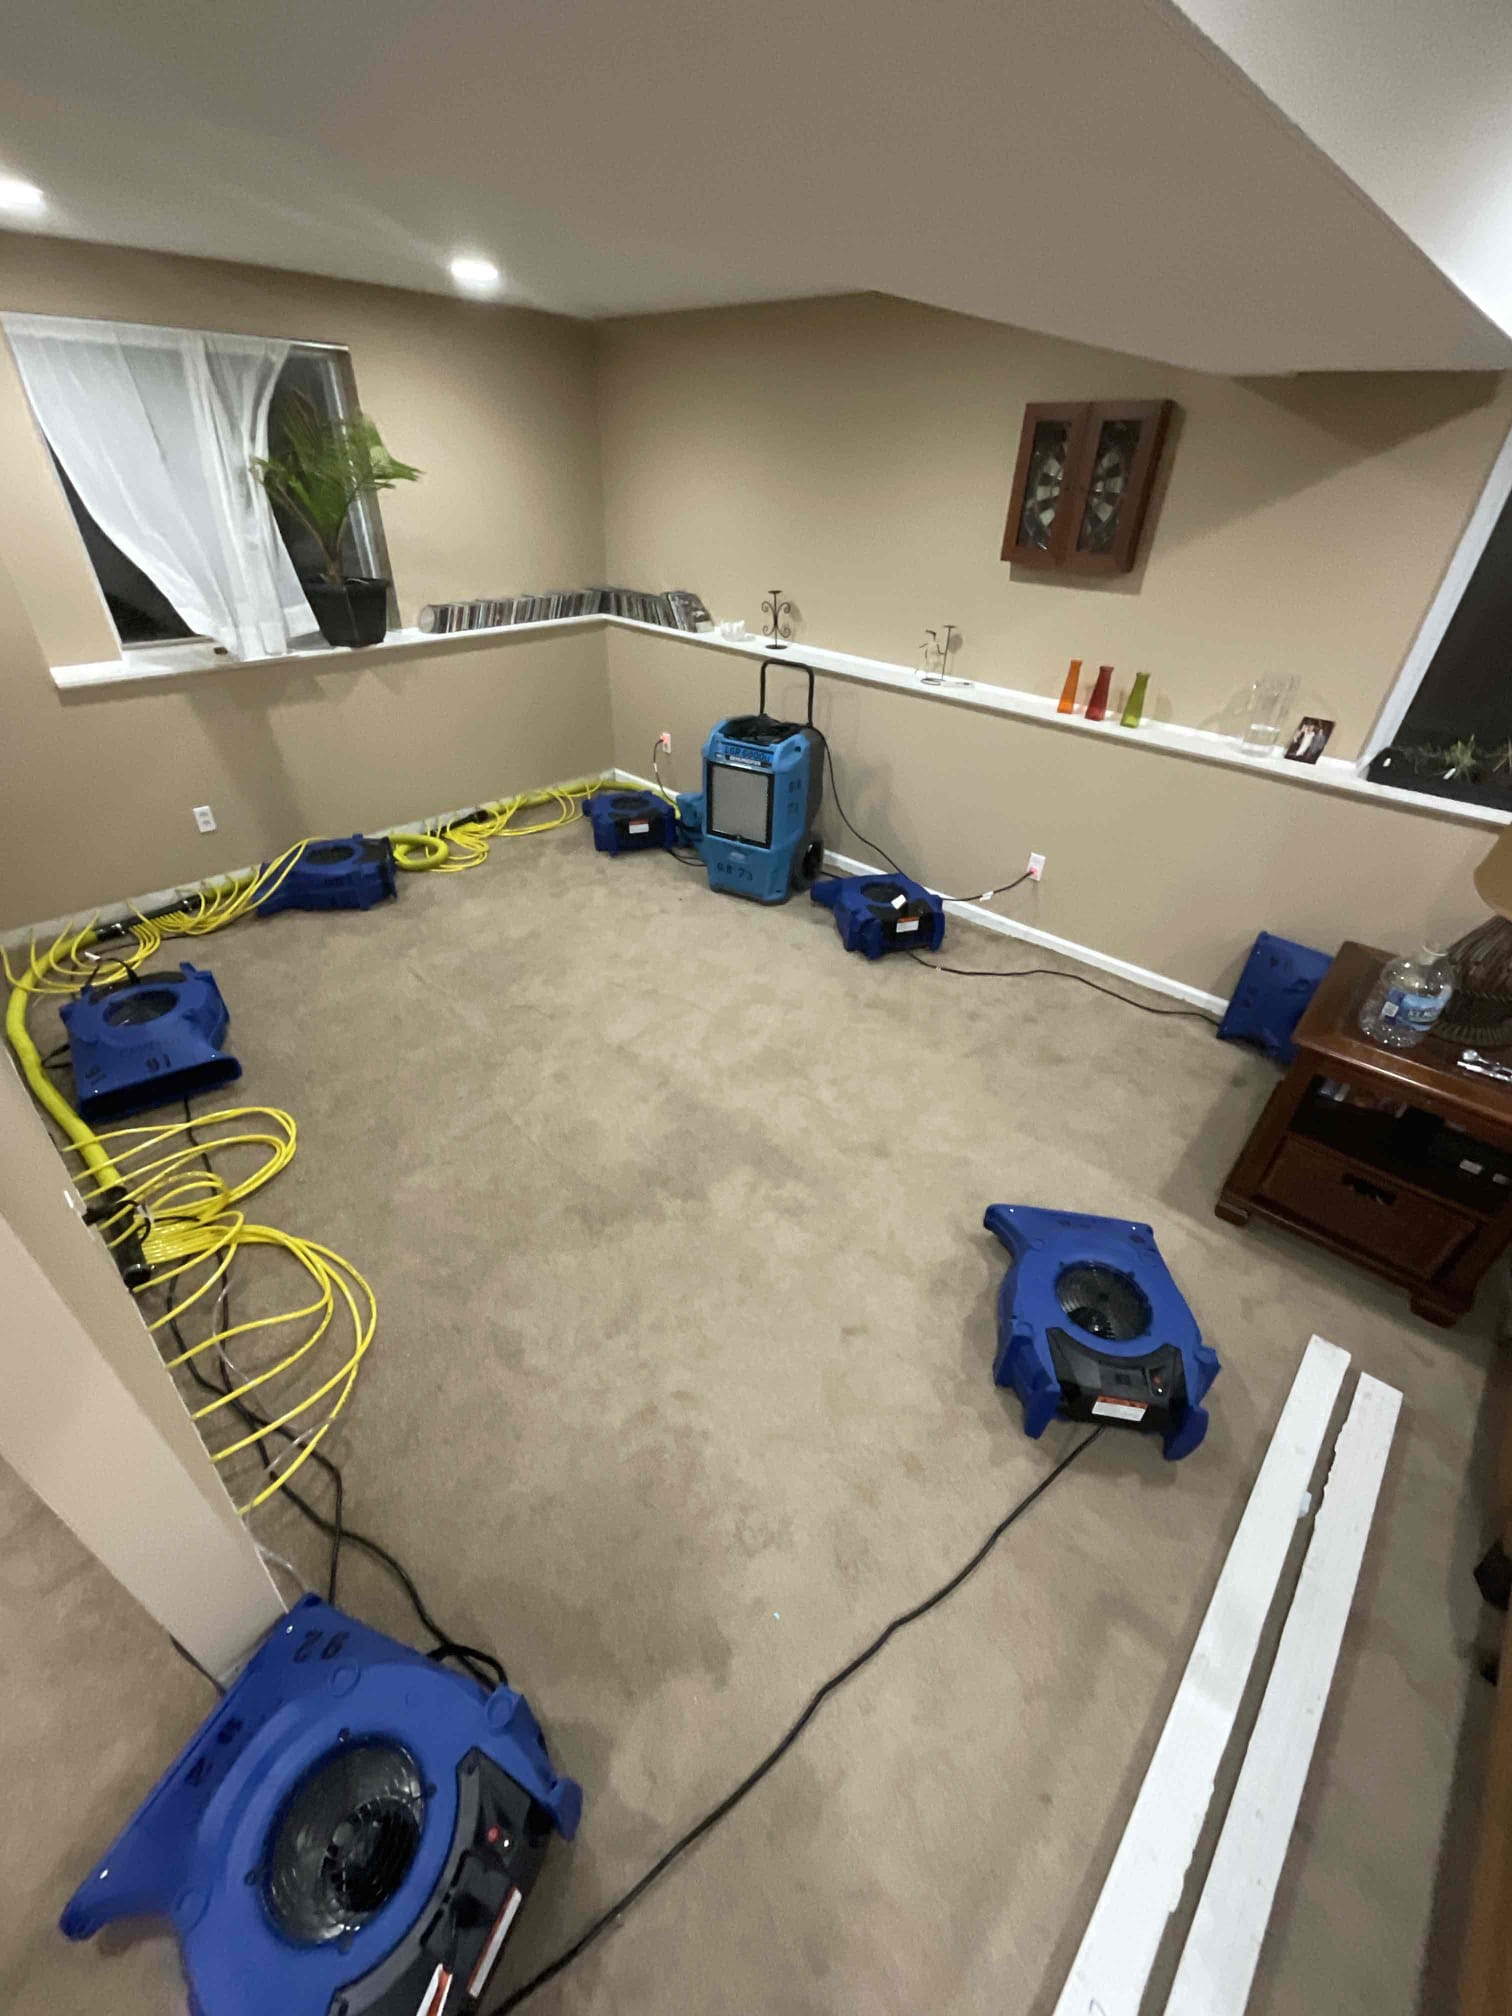 Carpet and wall drying in basement